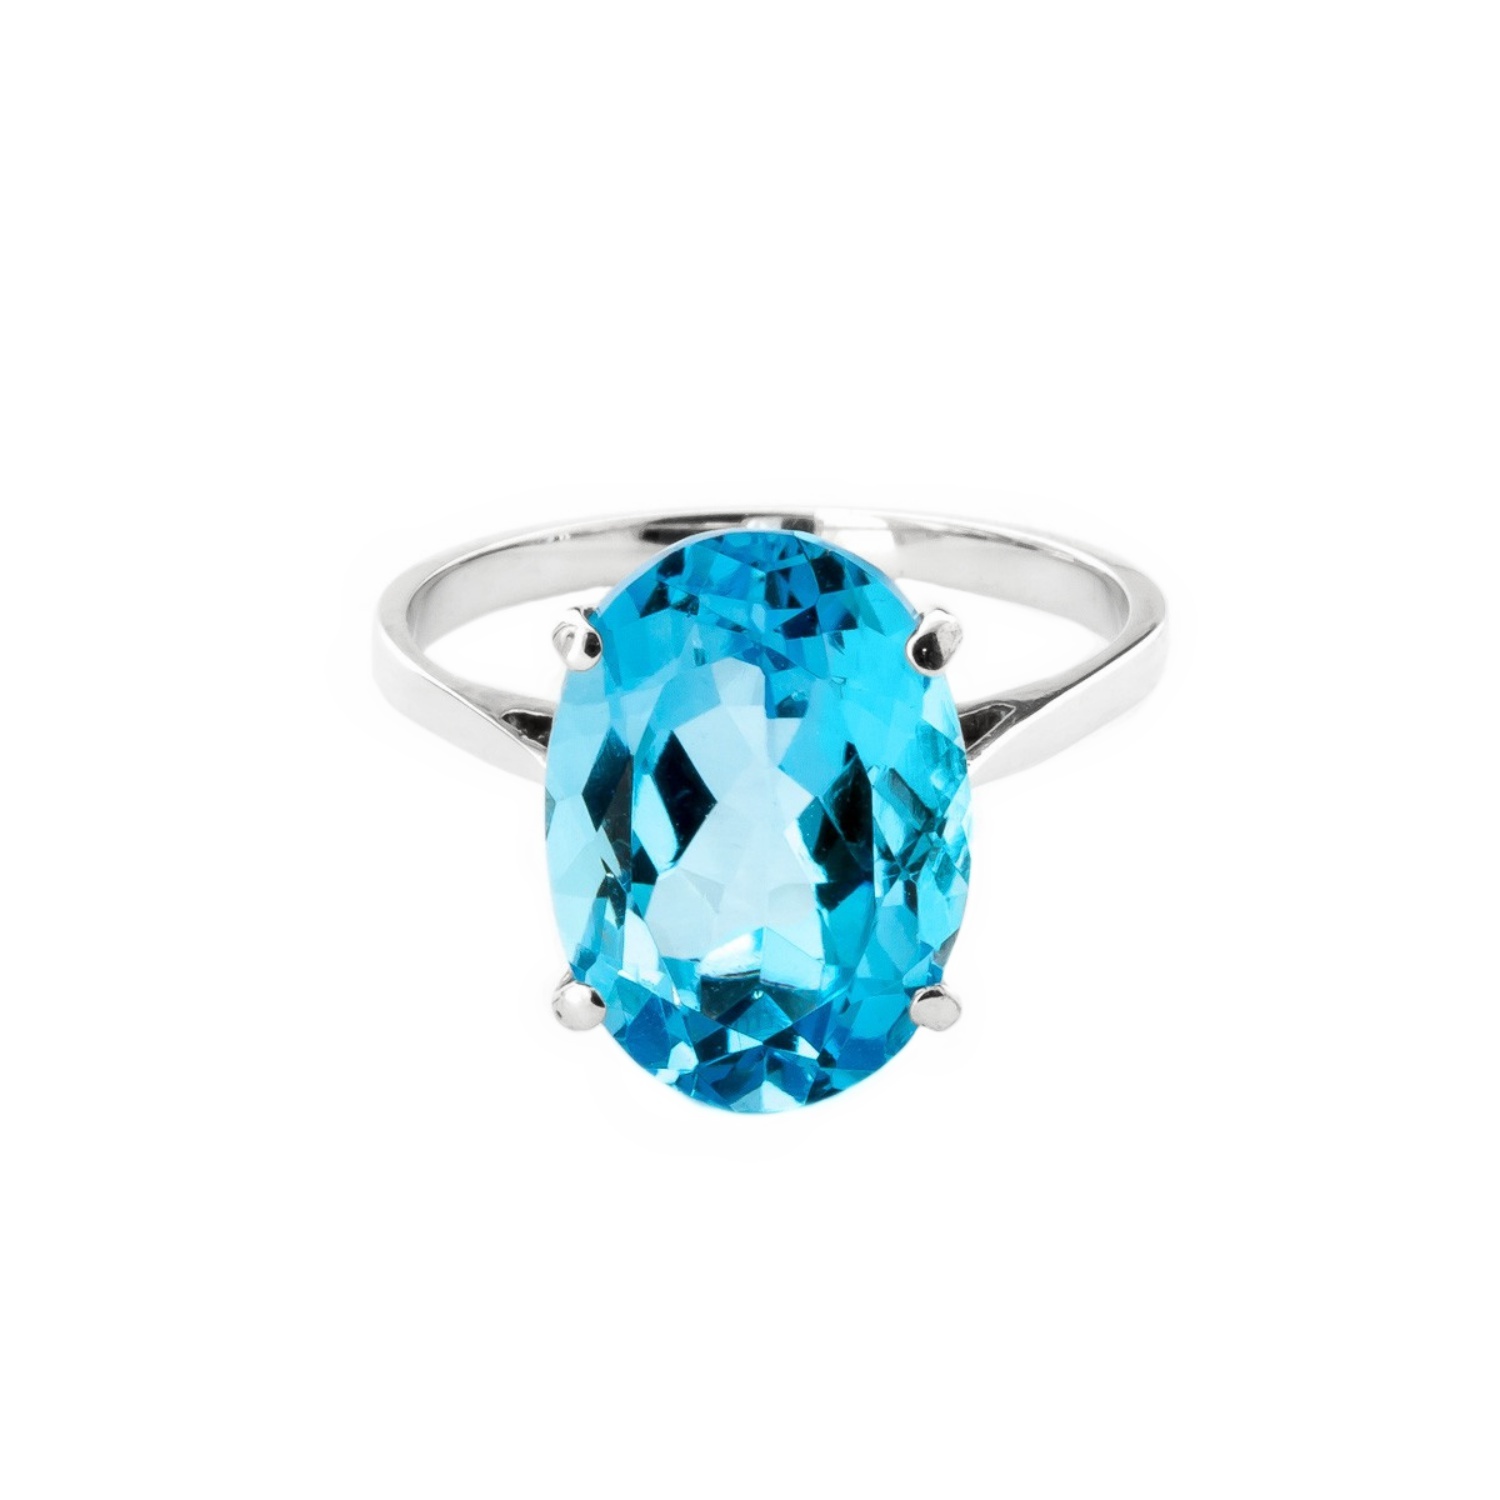 Galaxy Gold 8 Carat 14k Solid White Gold Ring Natural Oval Blue Topaz (10) - image 1 of 5